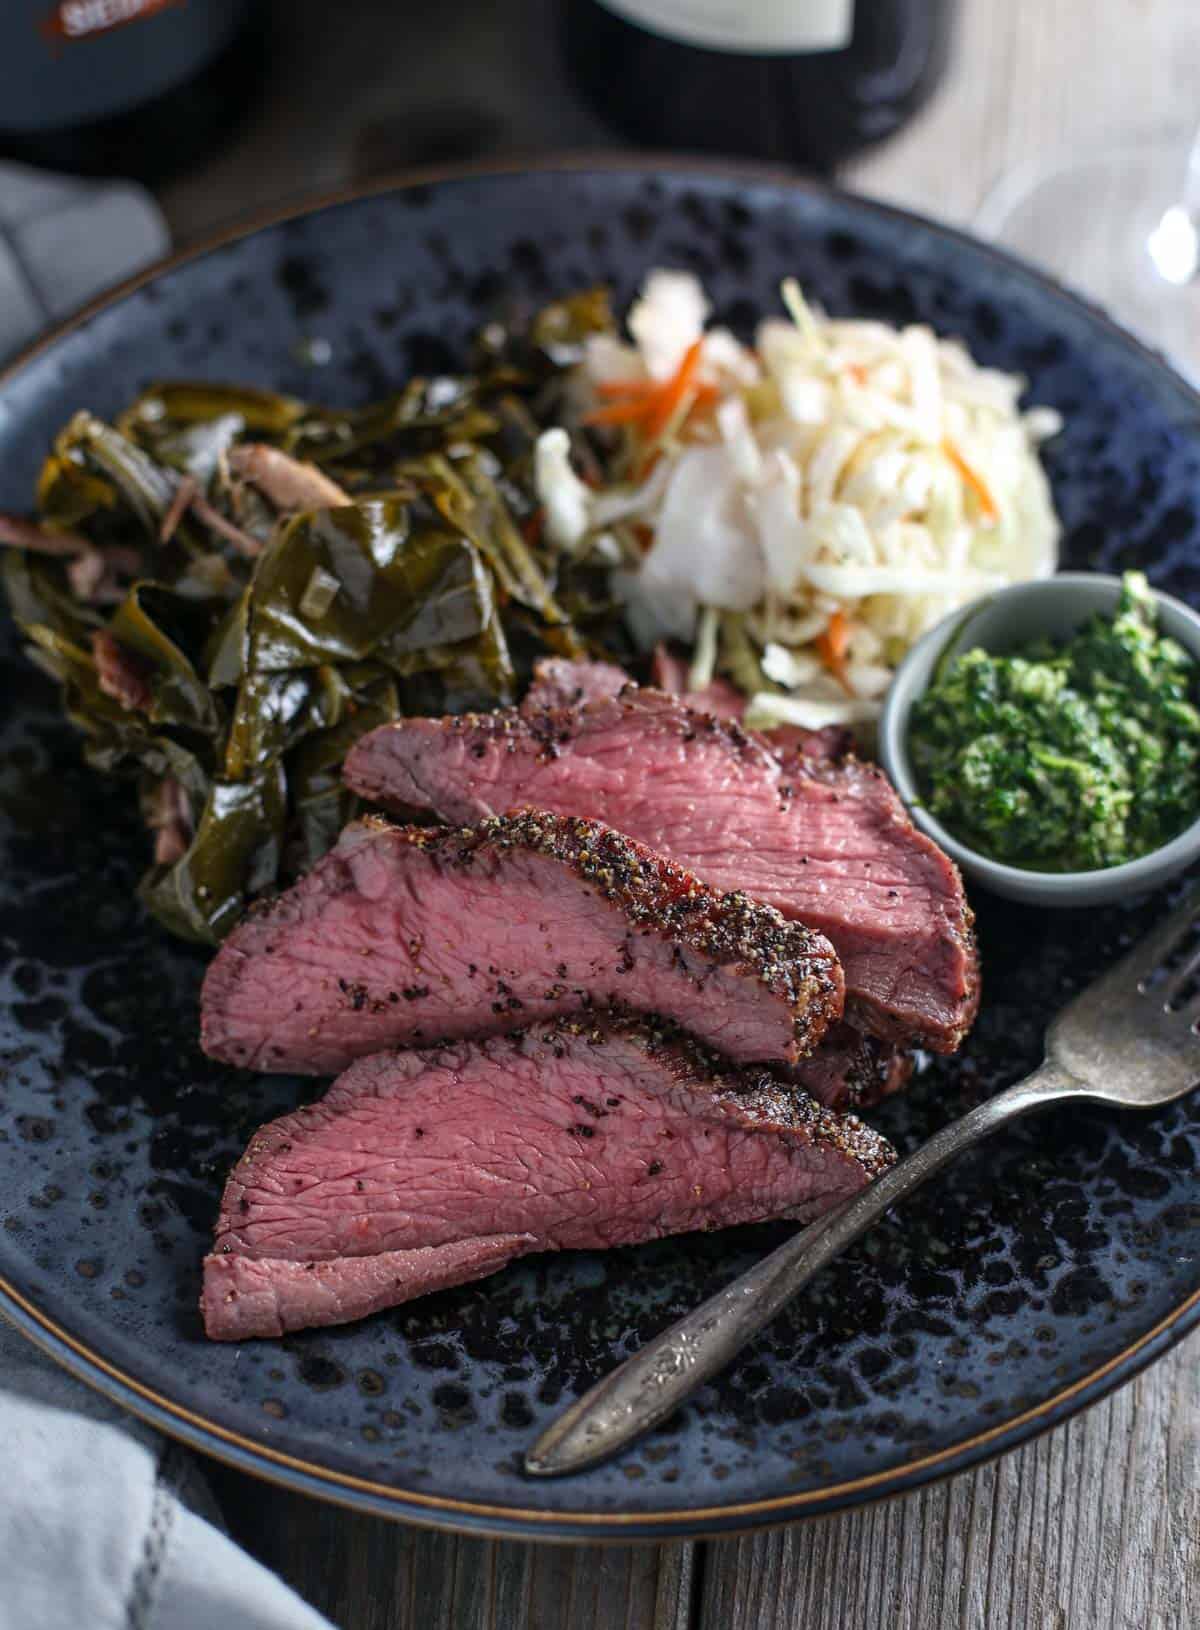 Smoked tri tip on a plate with collards and coleslaw.